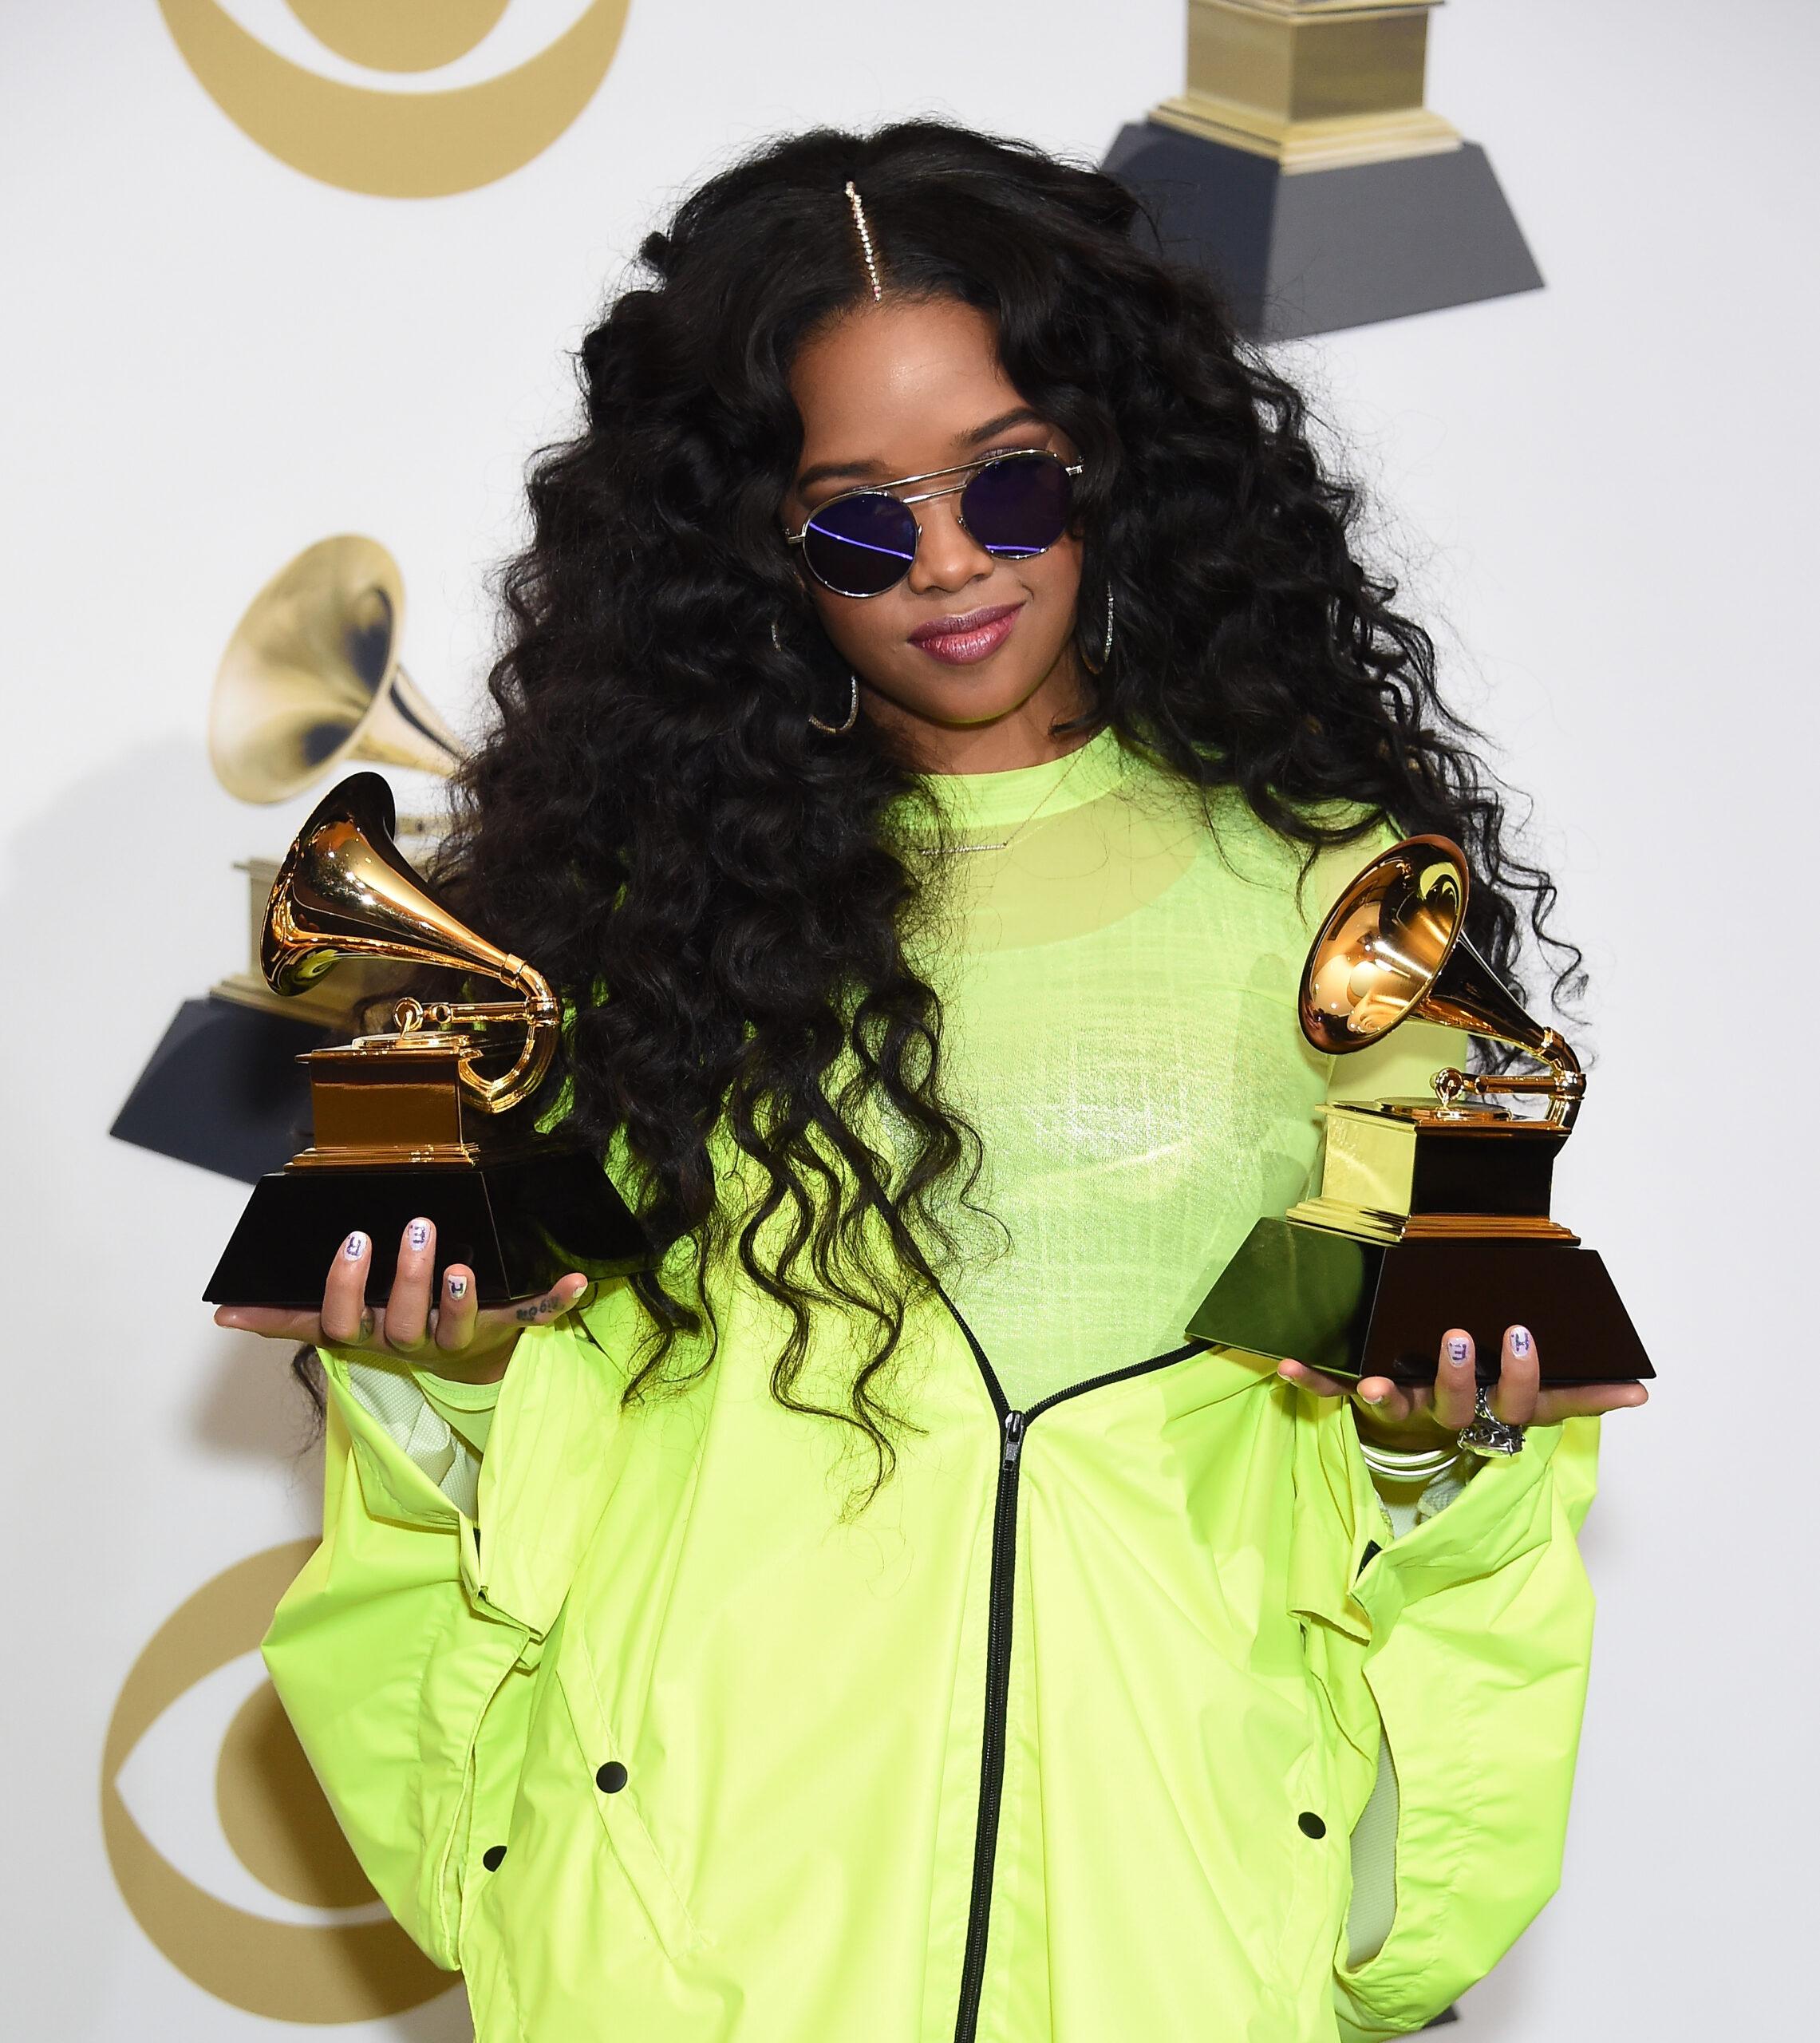 H.E.R. wins awards at the 61st Grammy Awards in Los Angeles